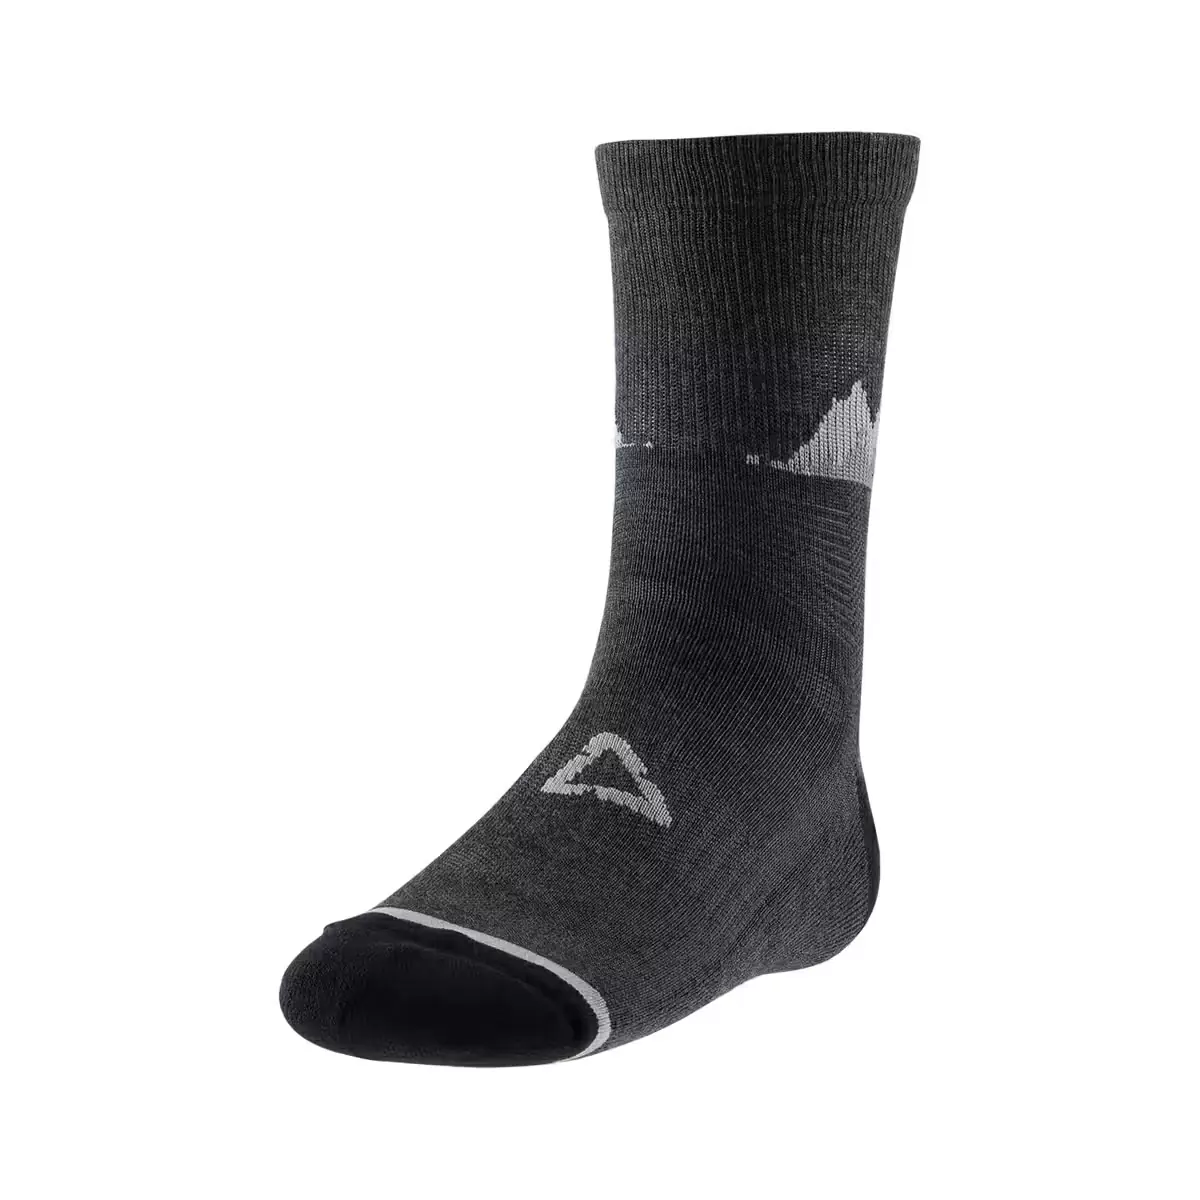 Calcetines Mtb Reforzados Gris Talla S/M (38-42) - image